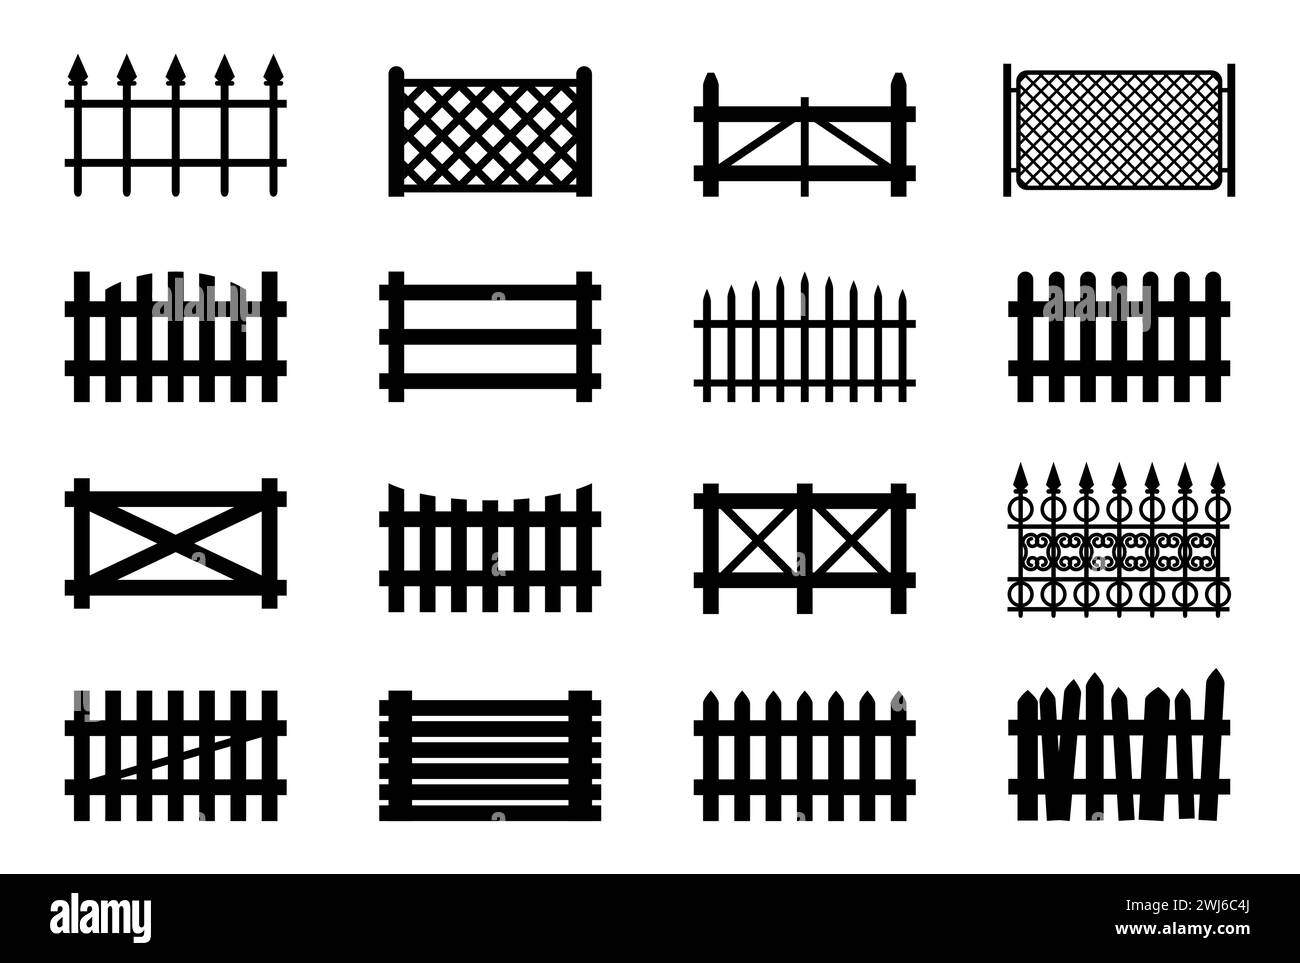 Fences set, picket, wooden and wire garden fence, park or yard obstruction, vector Stock Vector